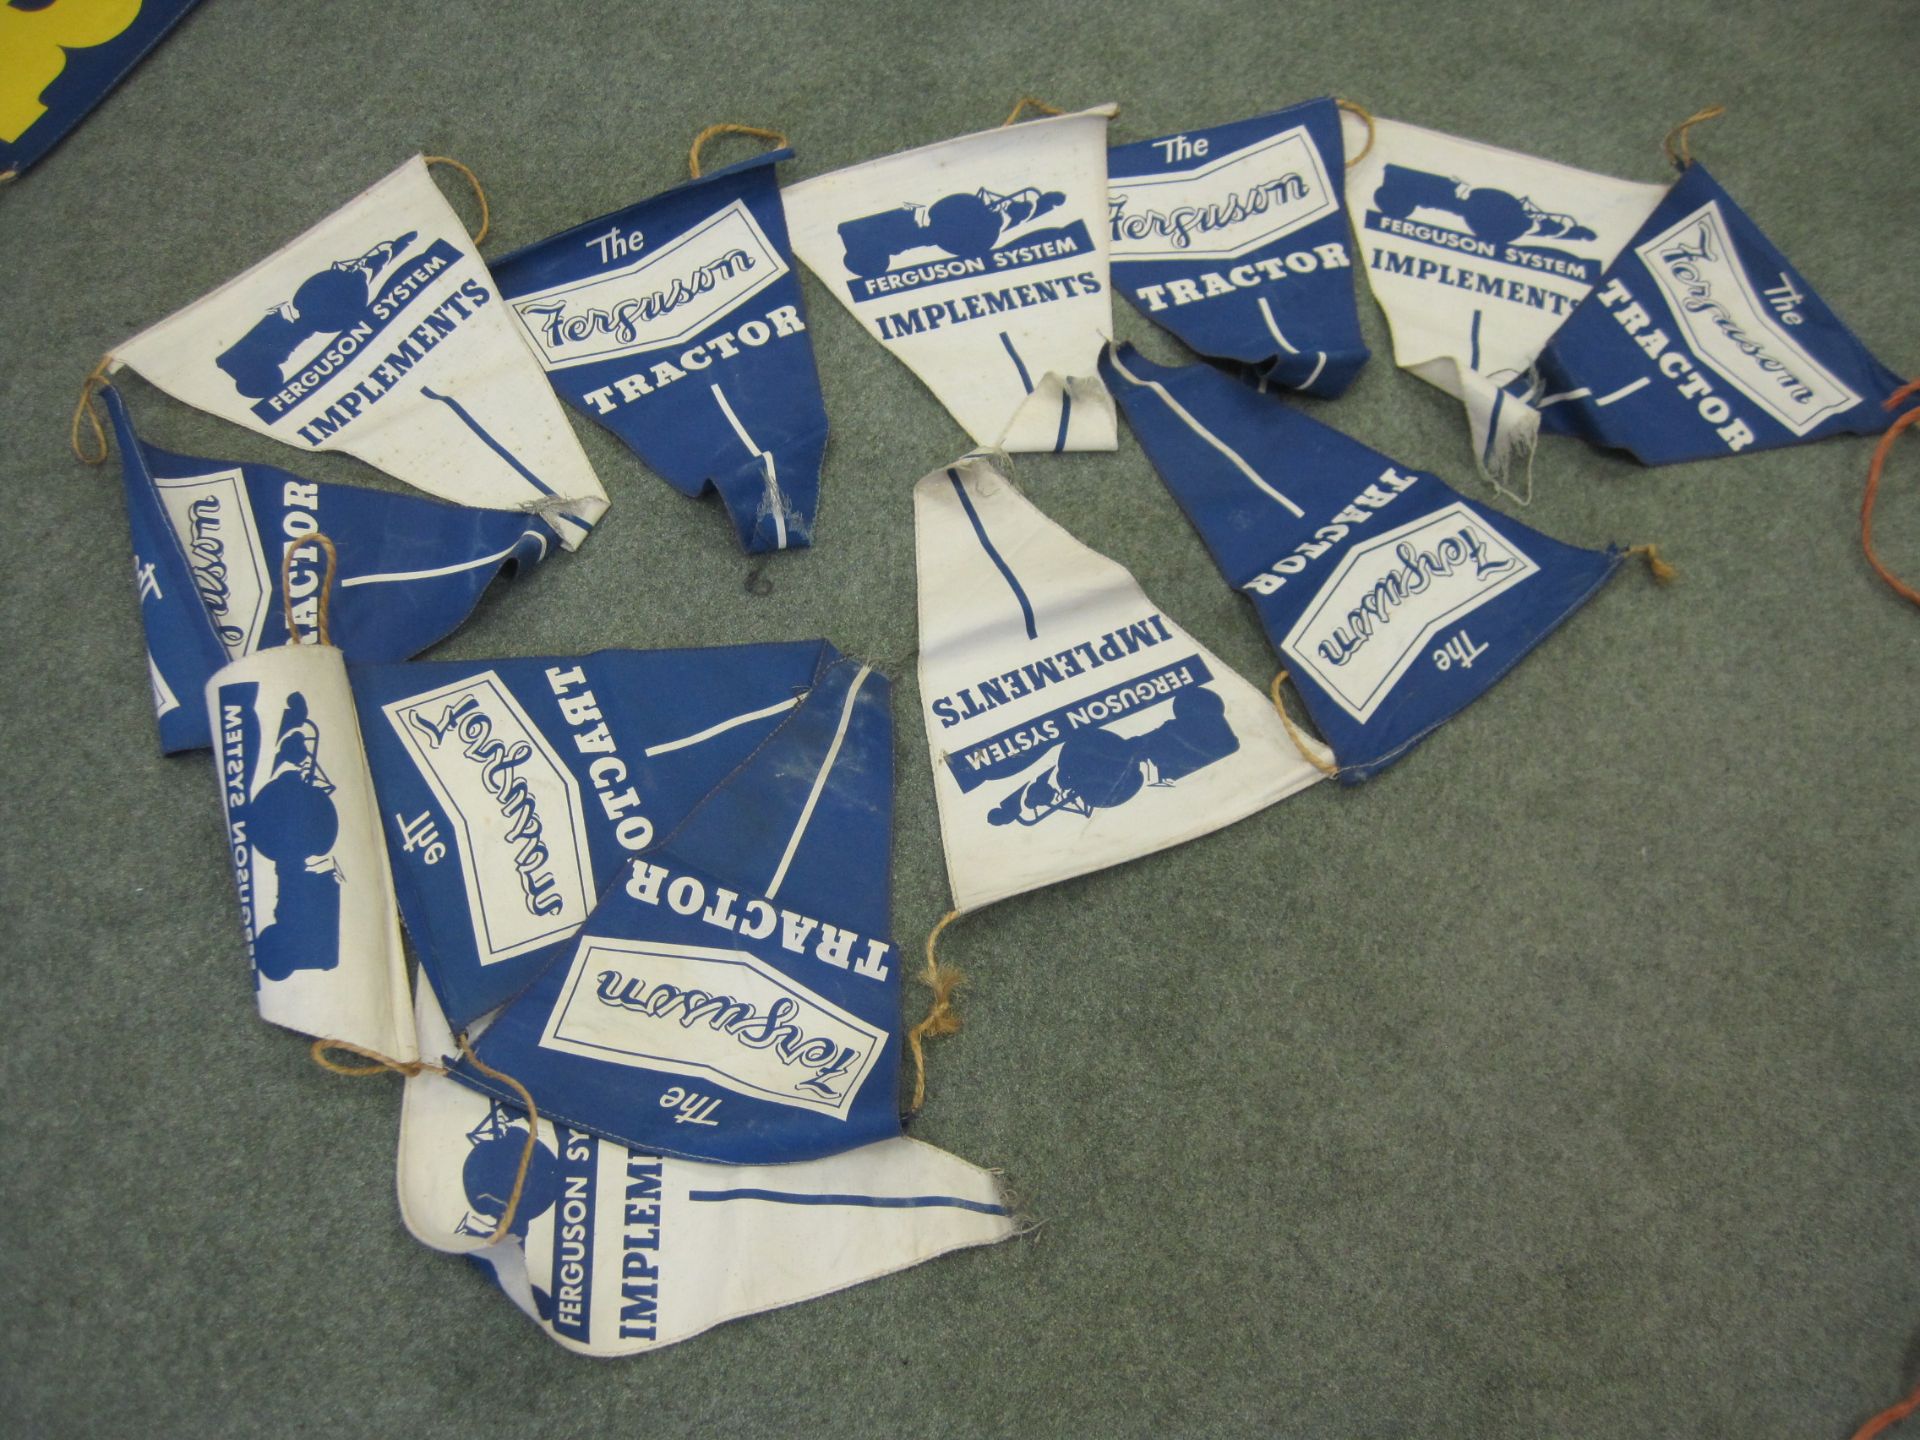 A quantity of dealership bunting consisting of 13no. alternating fabric pennants depicting the